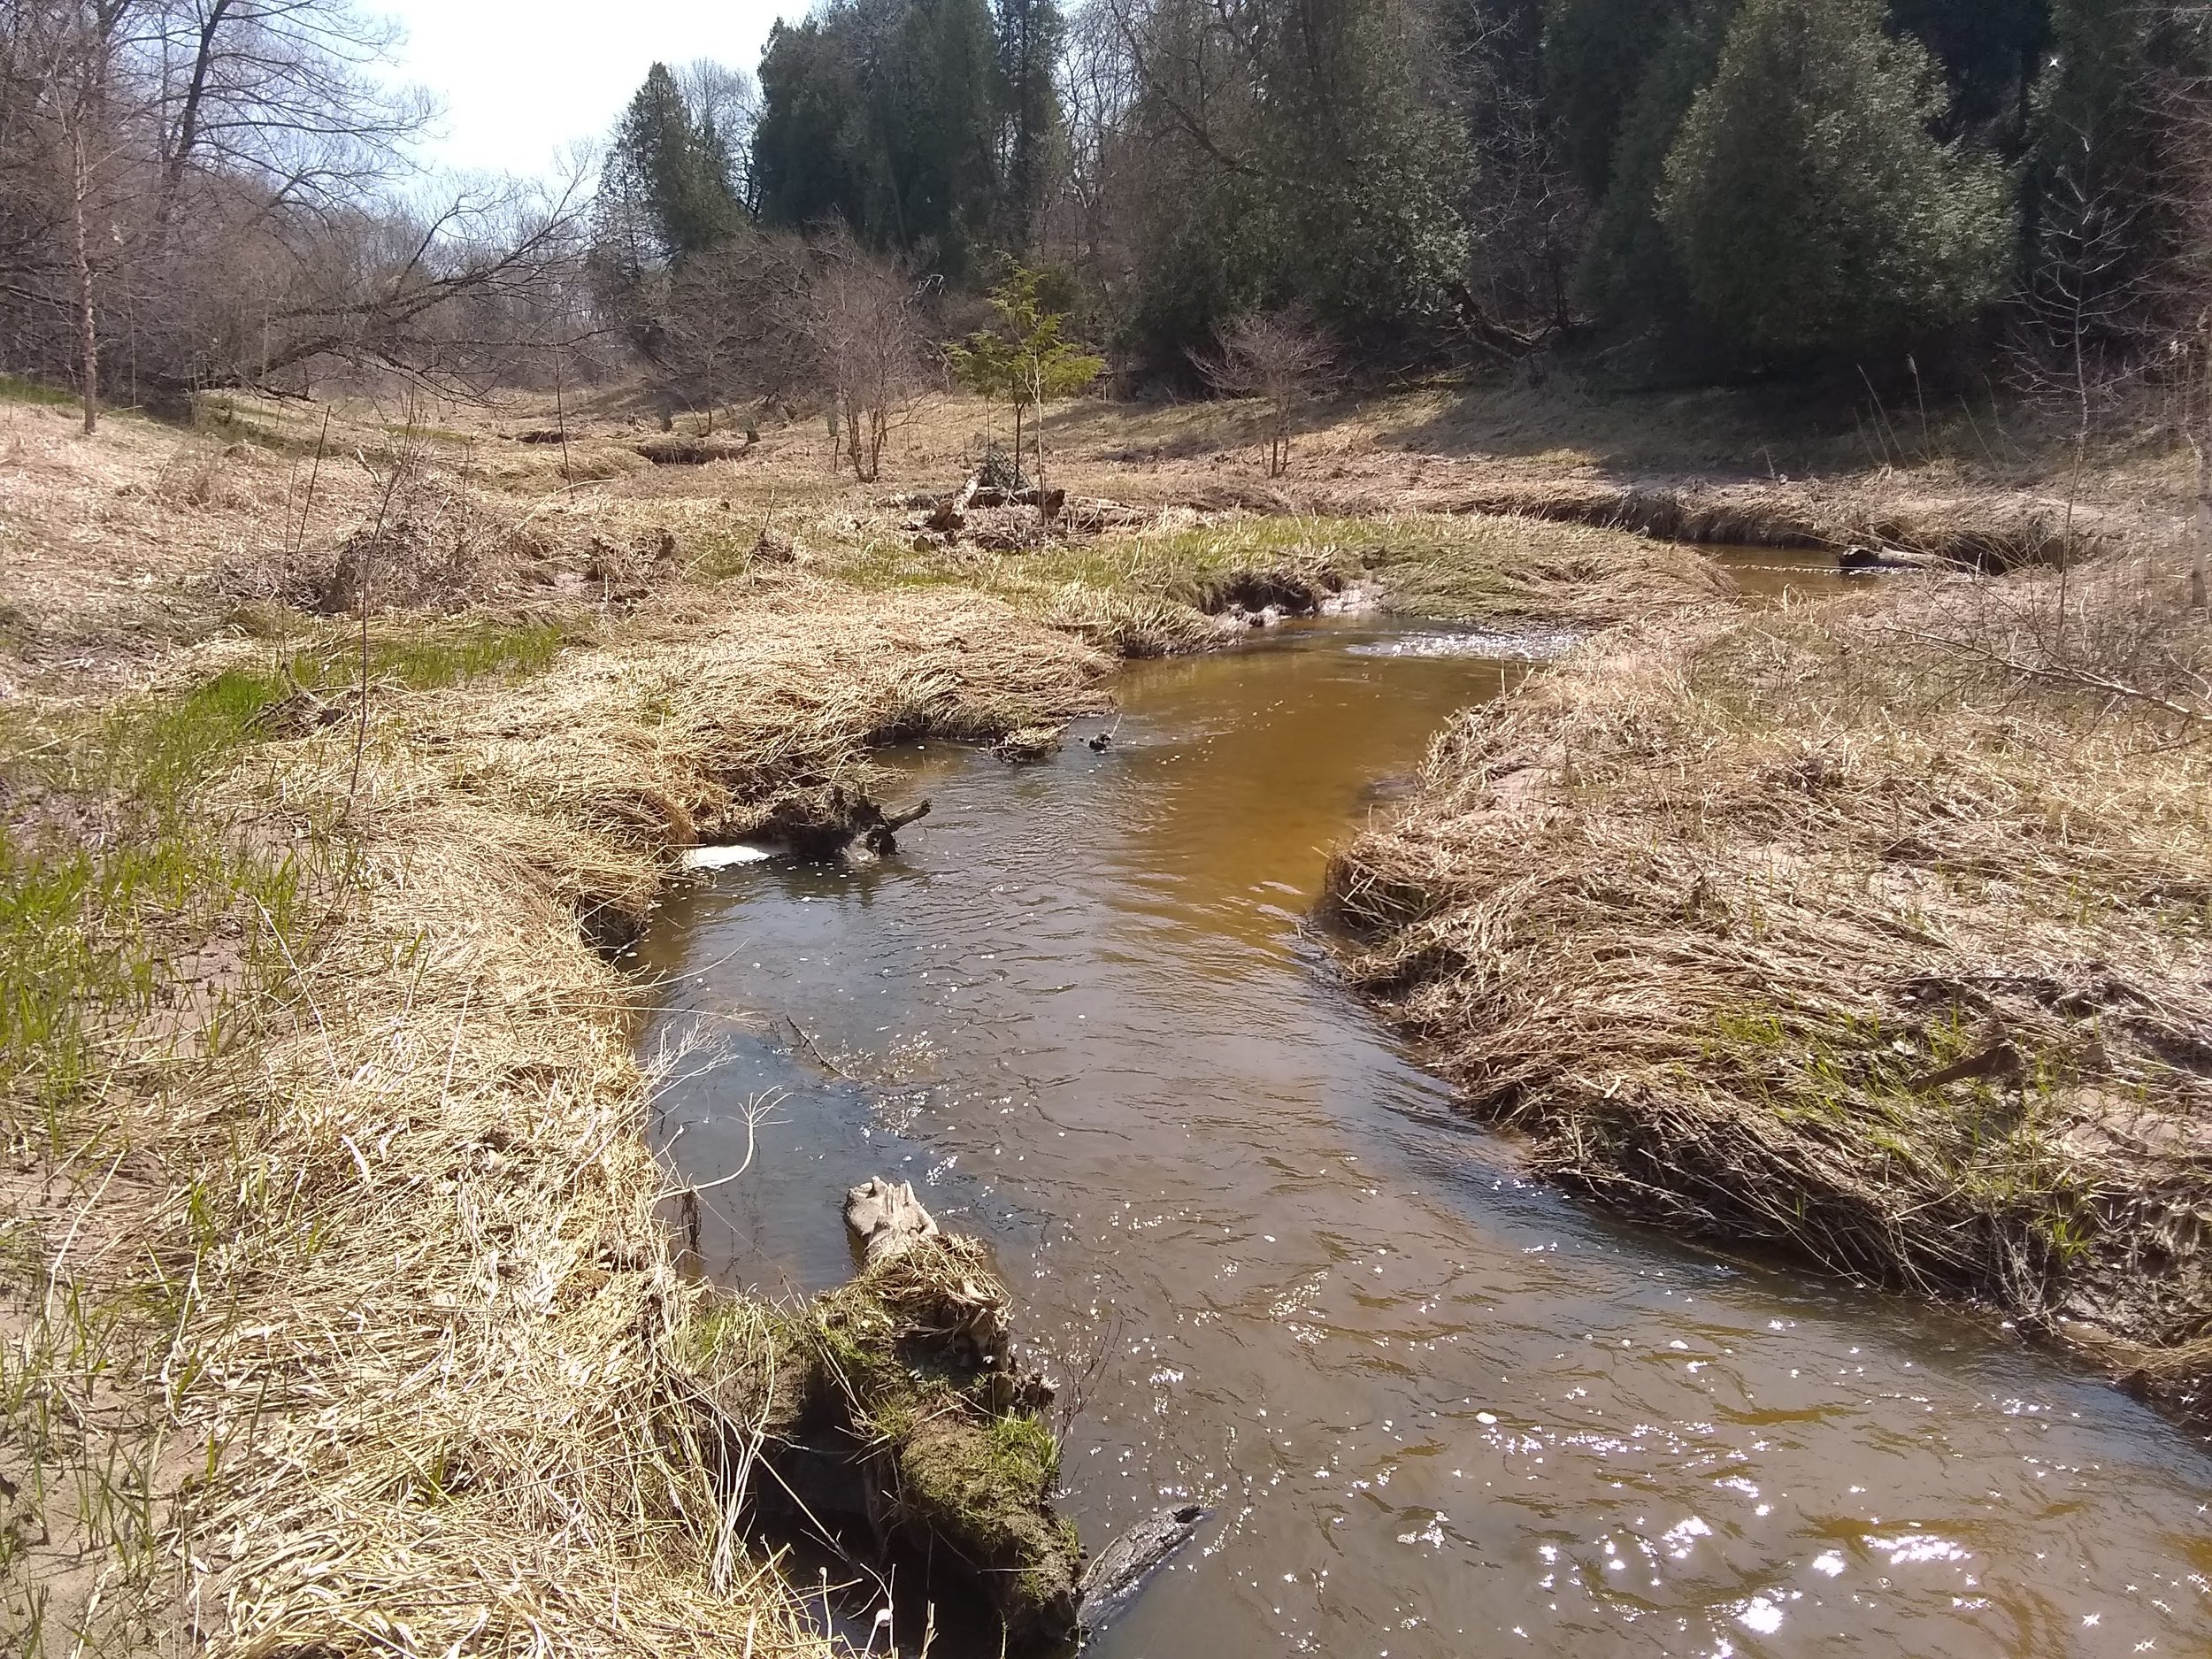 Post-dam removal: after removing sediment and restoring the stream behind a dam